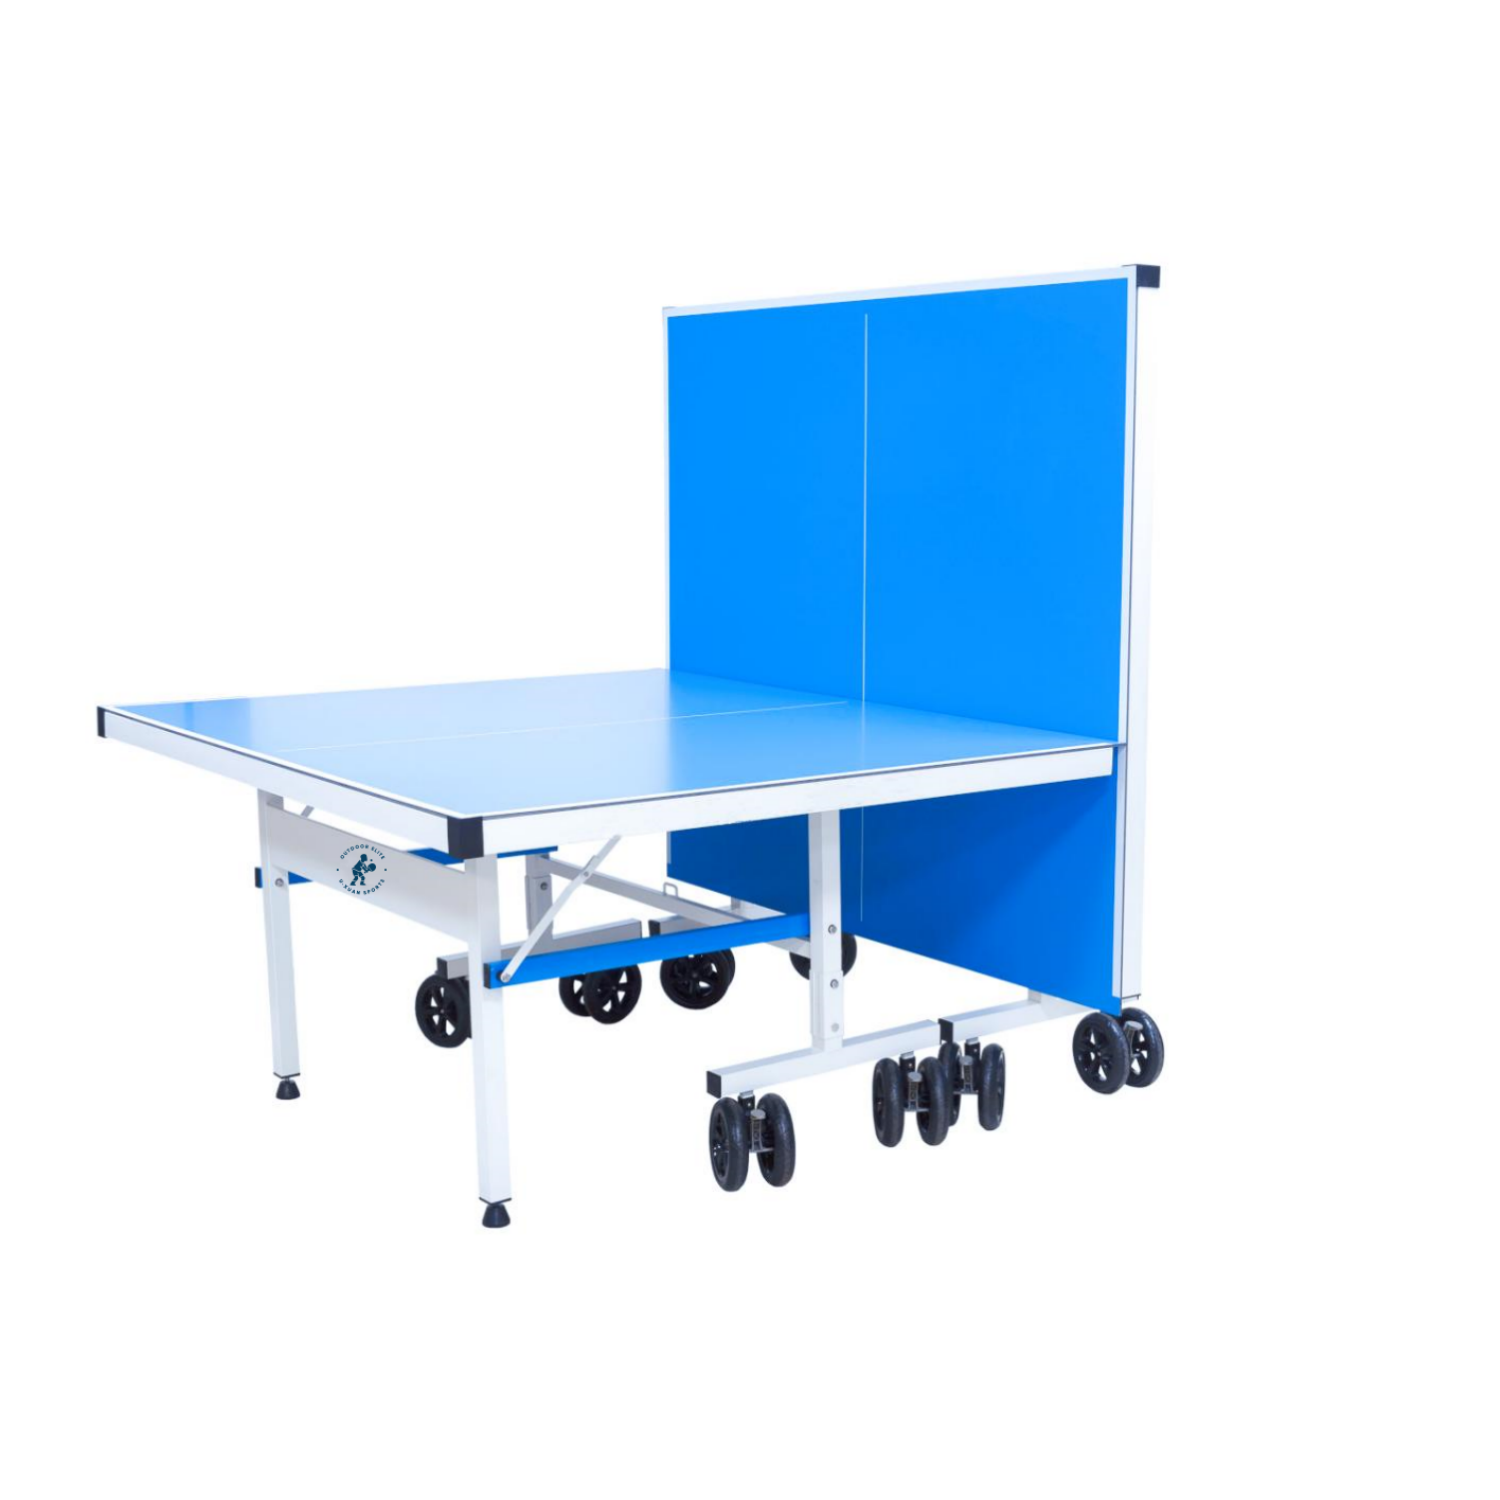 Outdoor Elite PRO Table Tennis Table-All Weather Table